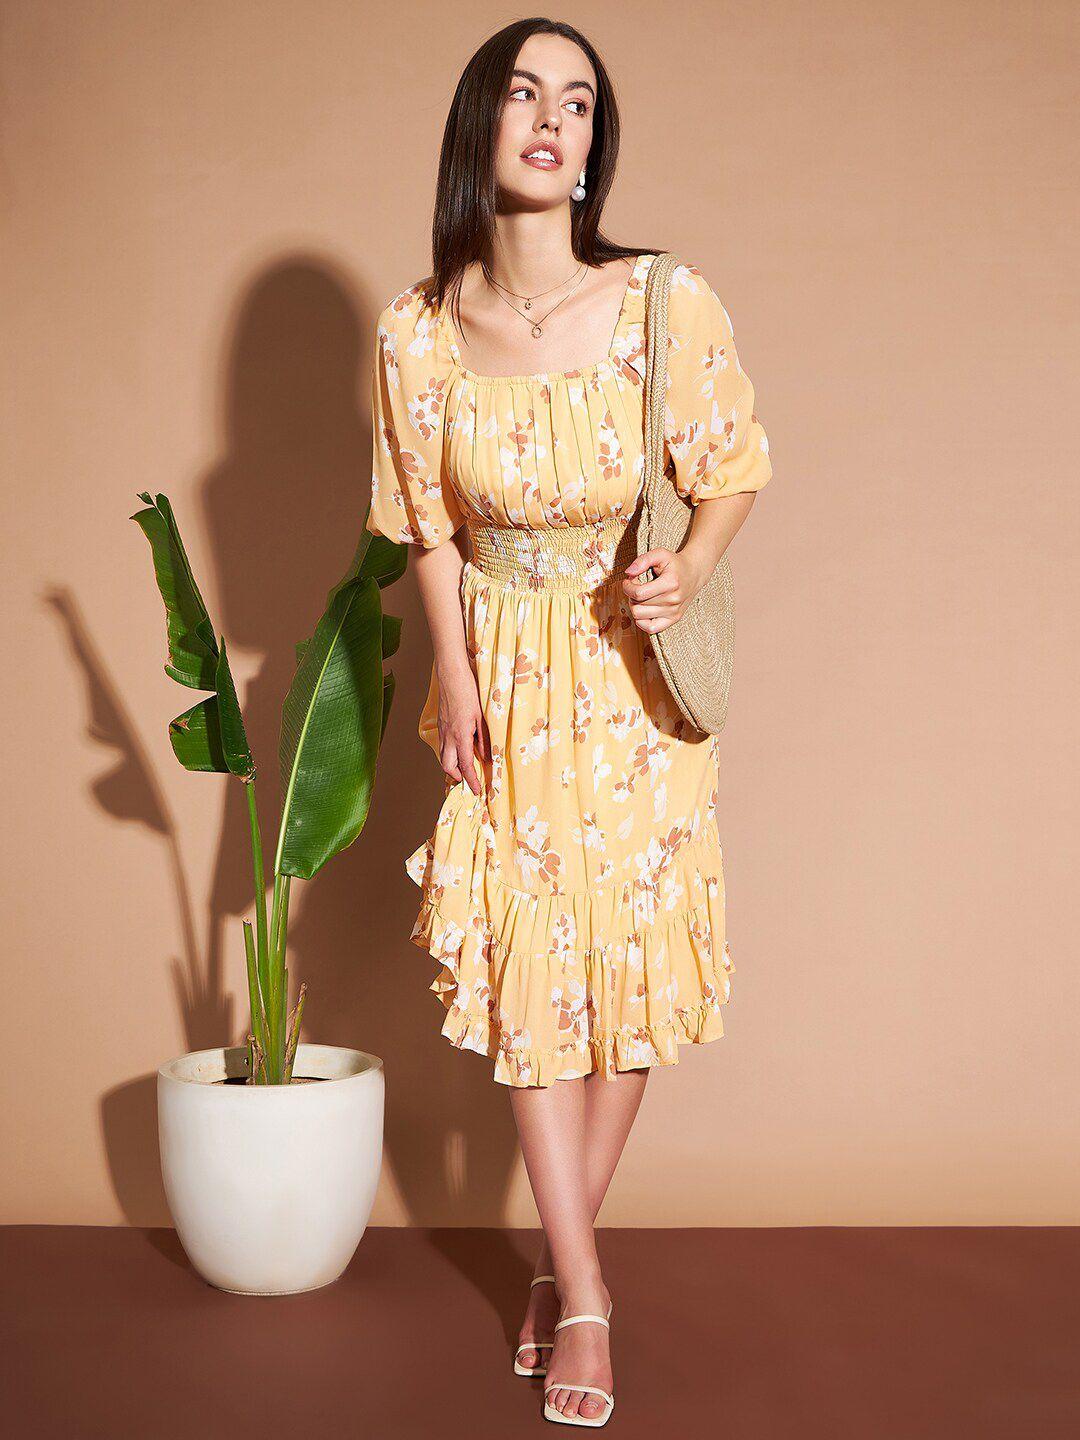 marie claire mustard yellow floral printed puff sleeves smocked fit & flare dress